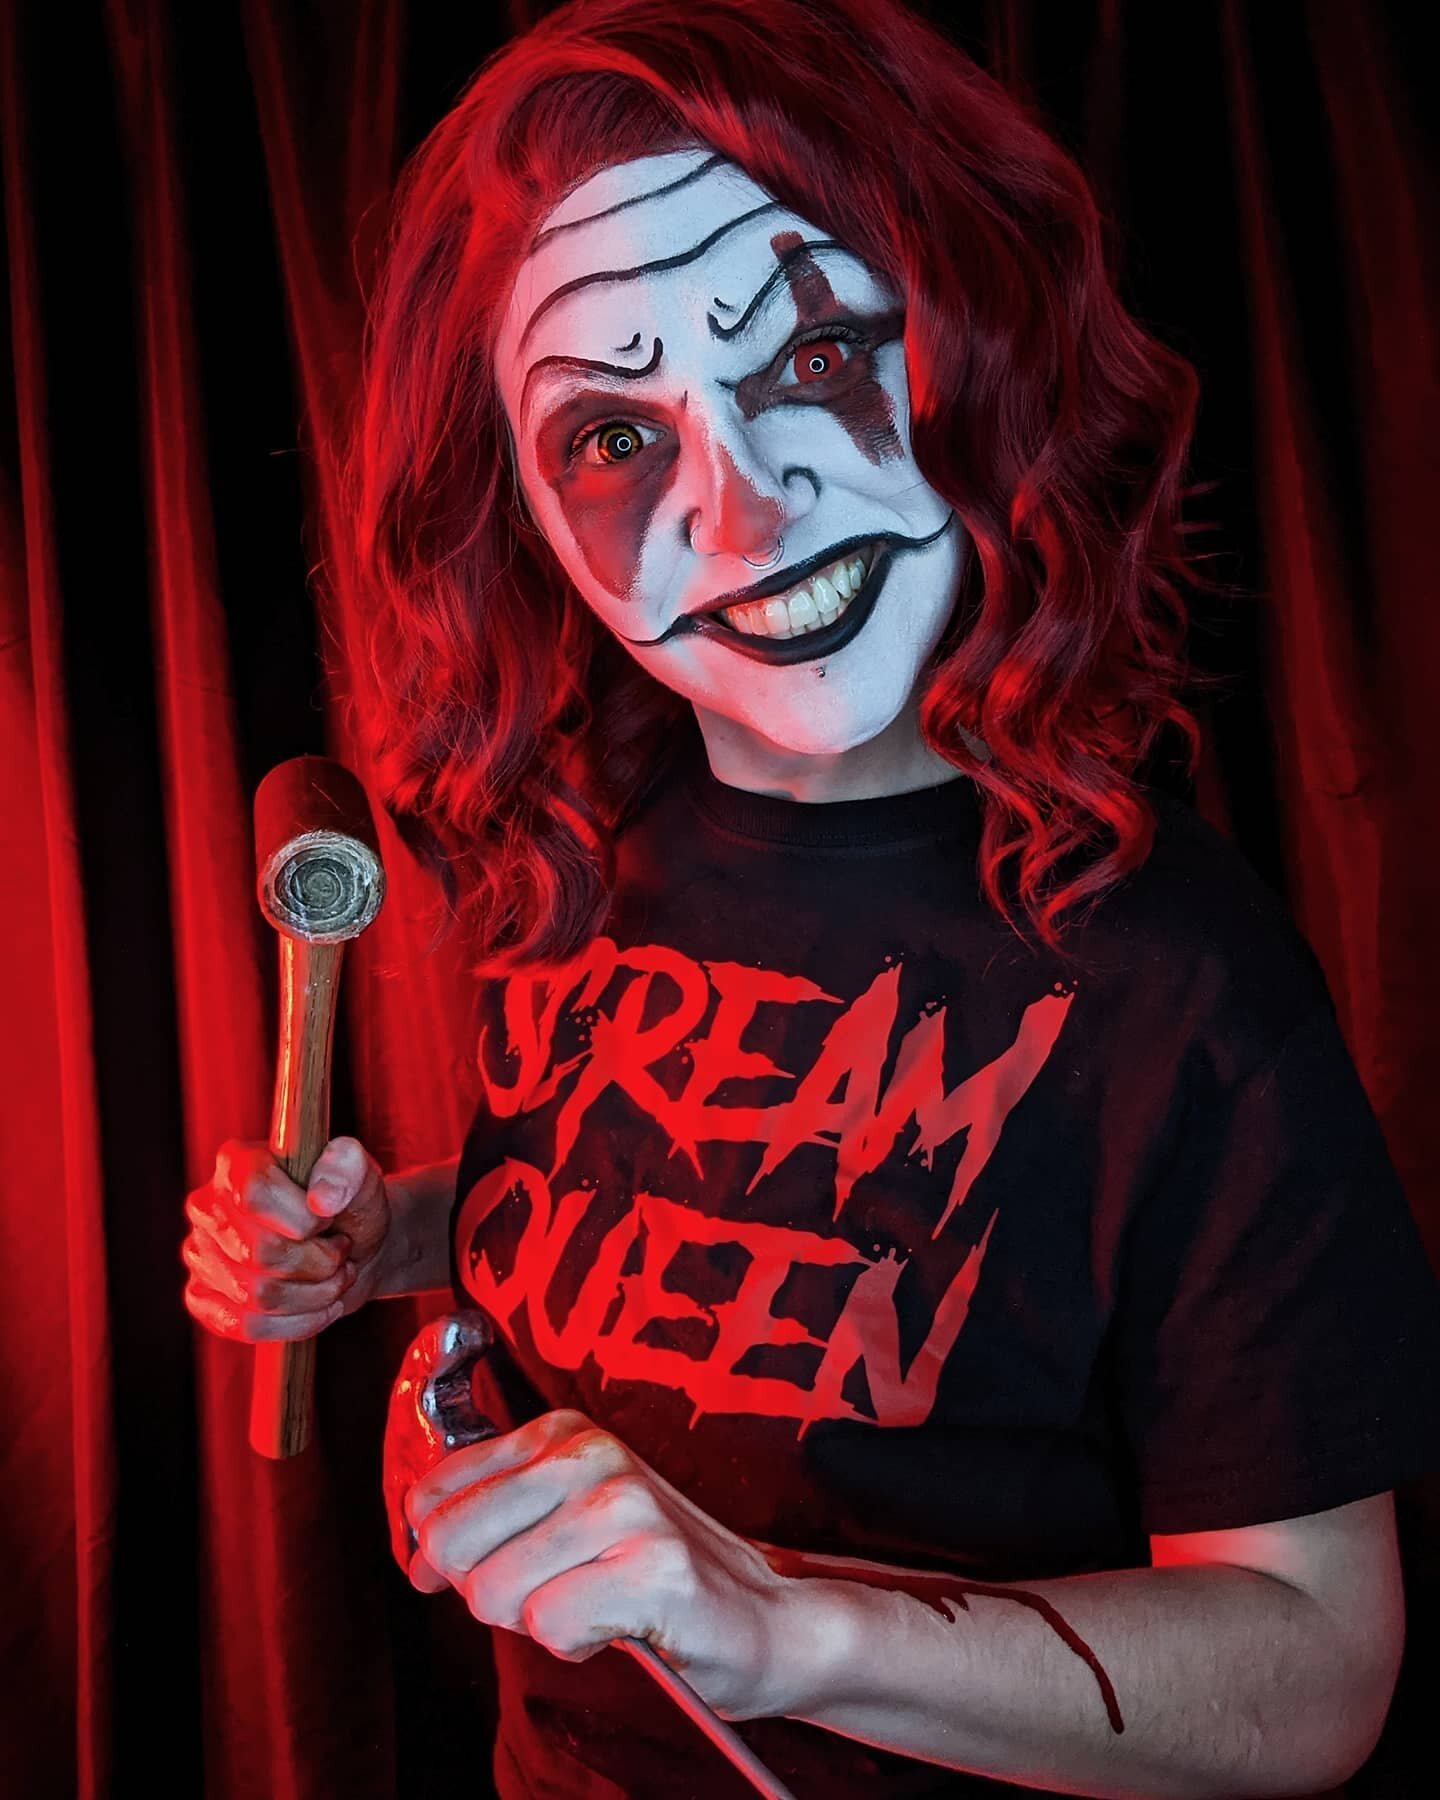 After work at the hospital Libby Lobotomy is just clownin' around in her @channel13clothing Scream Queen shirt!
*
*
*
*
*
*
*
*
*
*
*
*
*
#cosplay #cosplayer #scream #ghoul #horror #horrormovies #weatherghoul #goth #gothmodel #model #clown #spooky #n